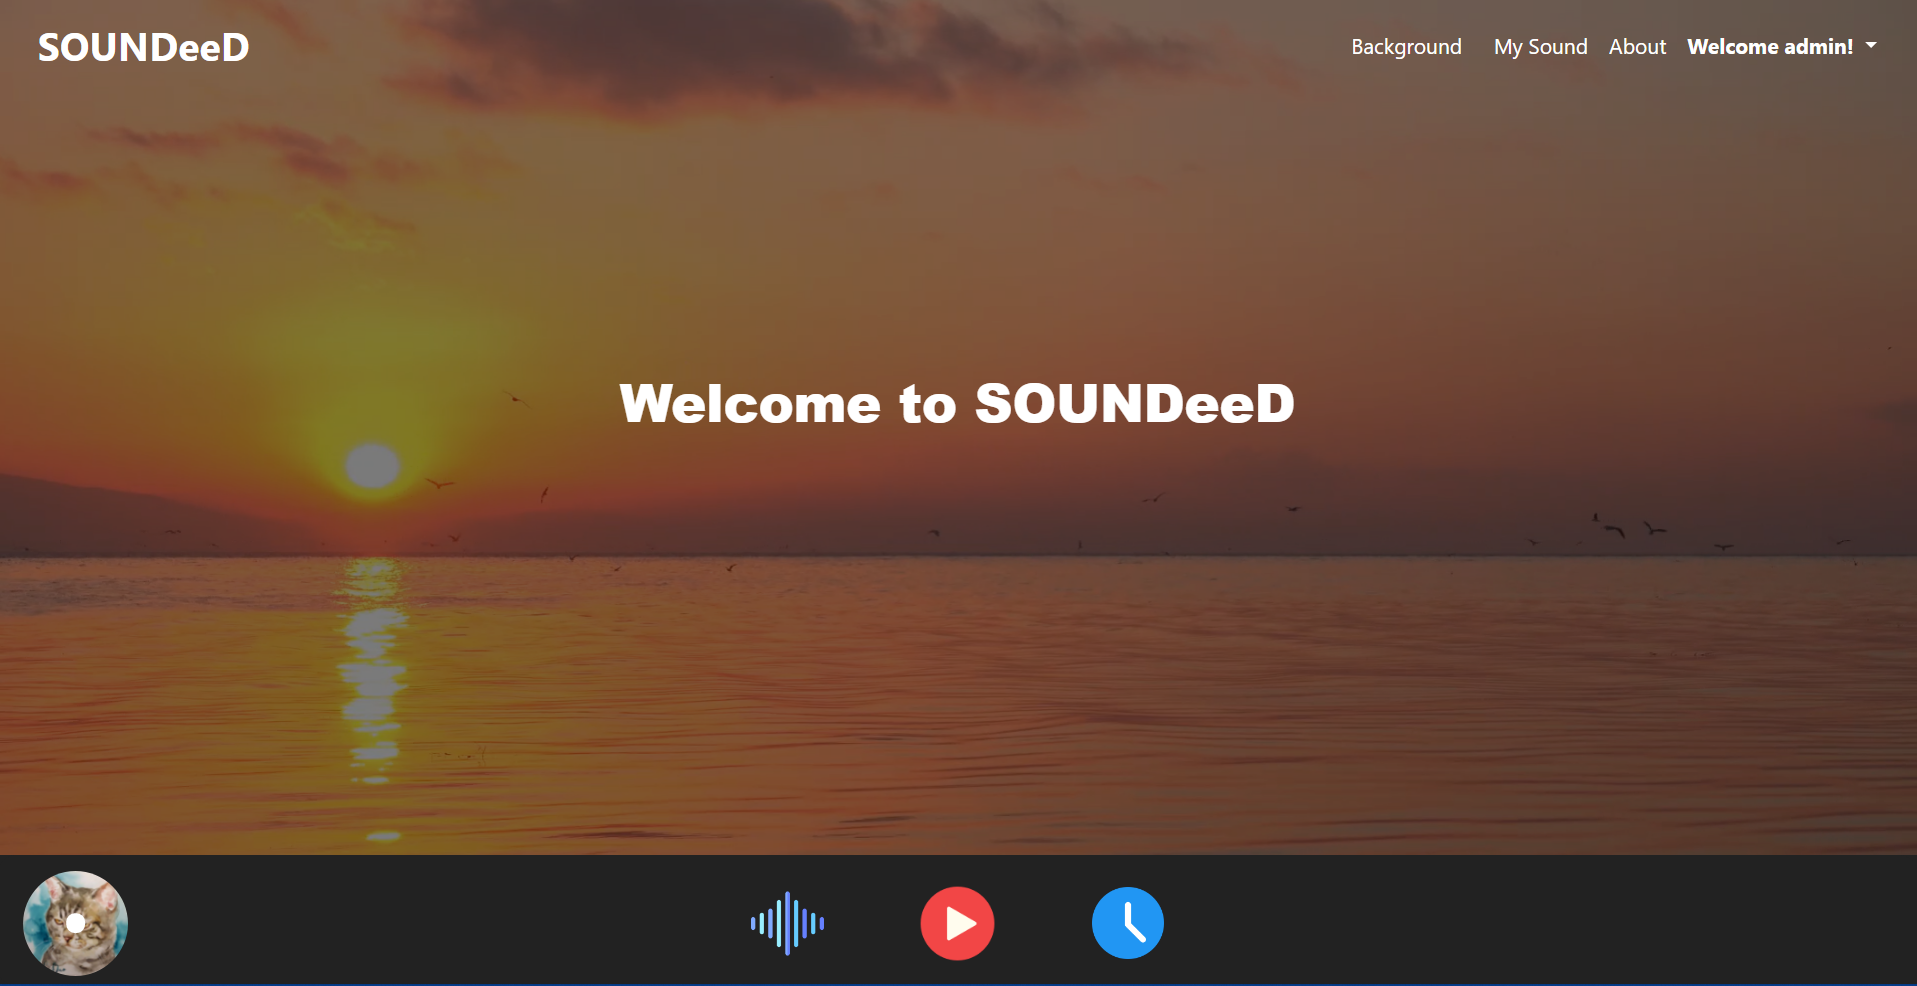 SOUNDeeD - Chill & Sound project